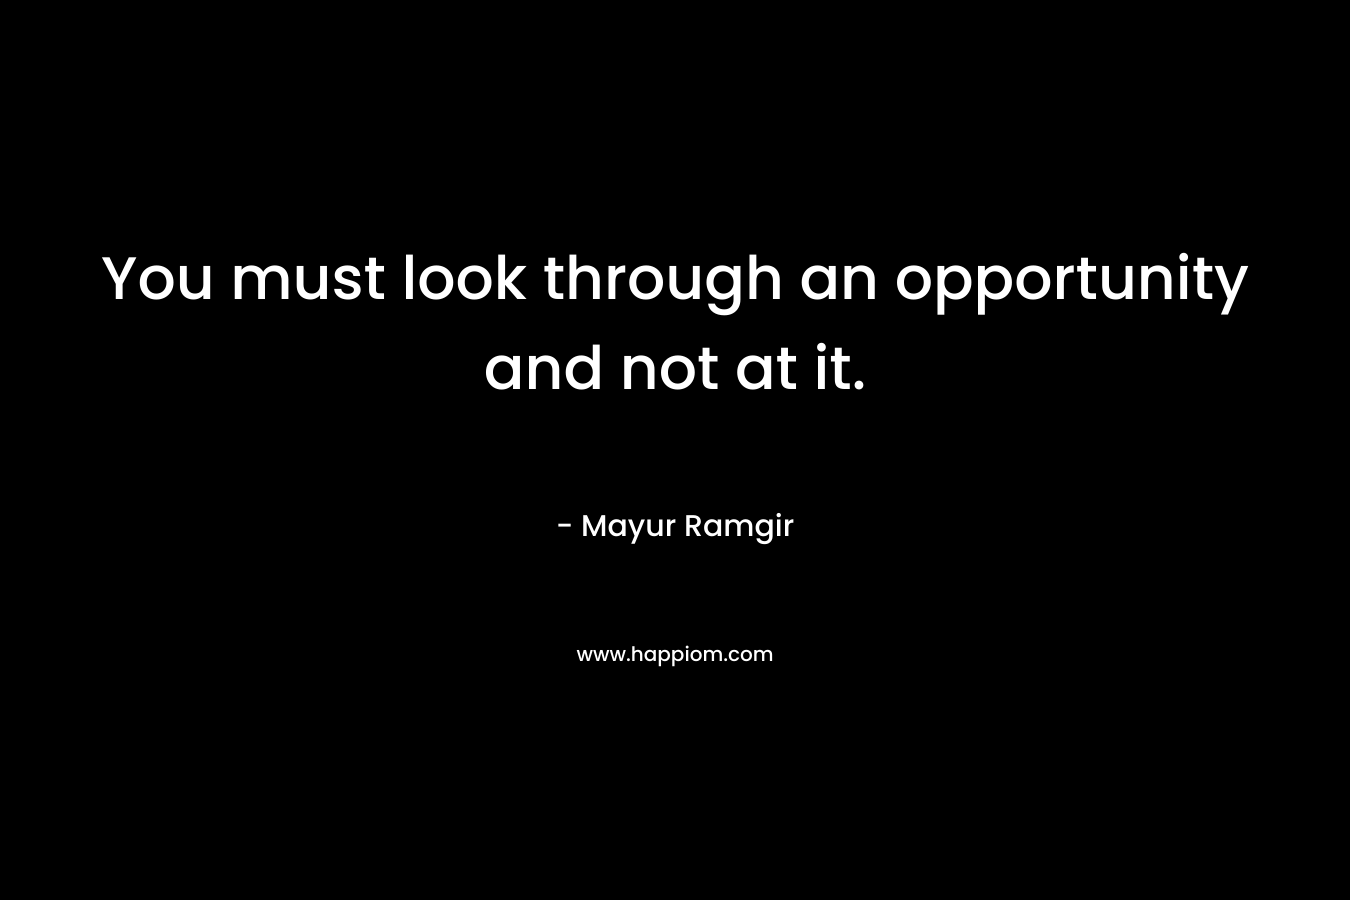 You must look through an opportunity and not at it.